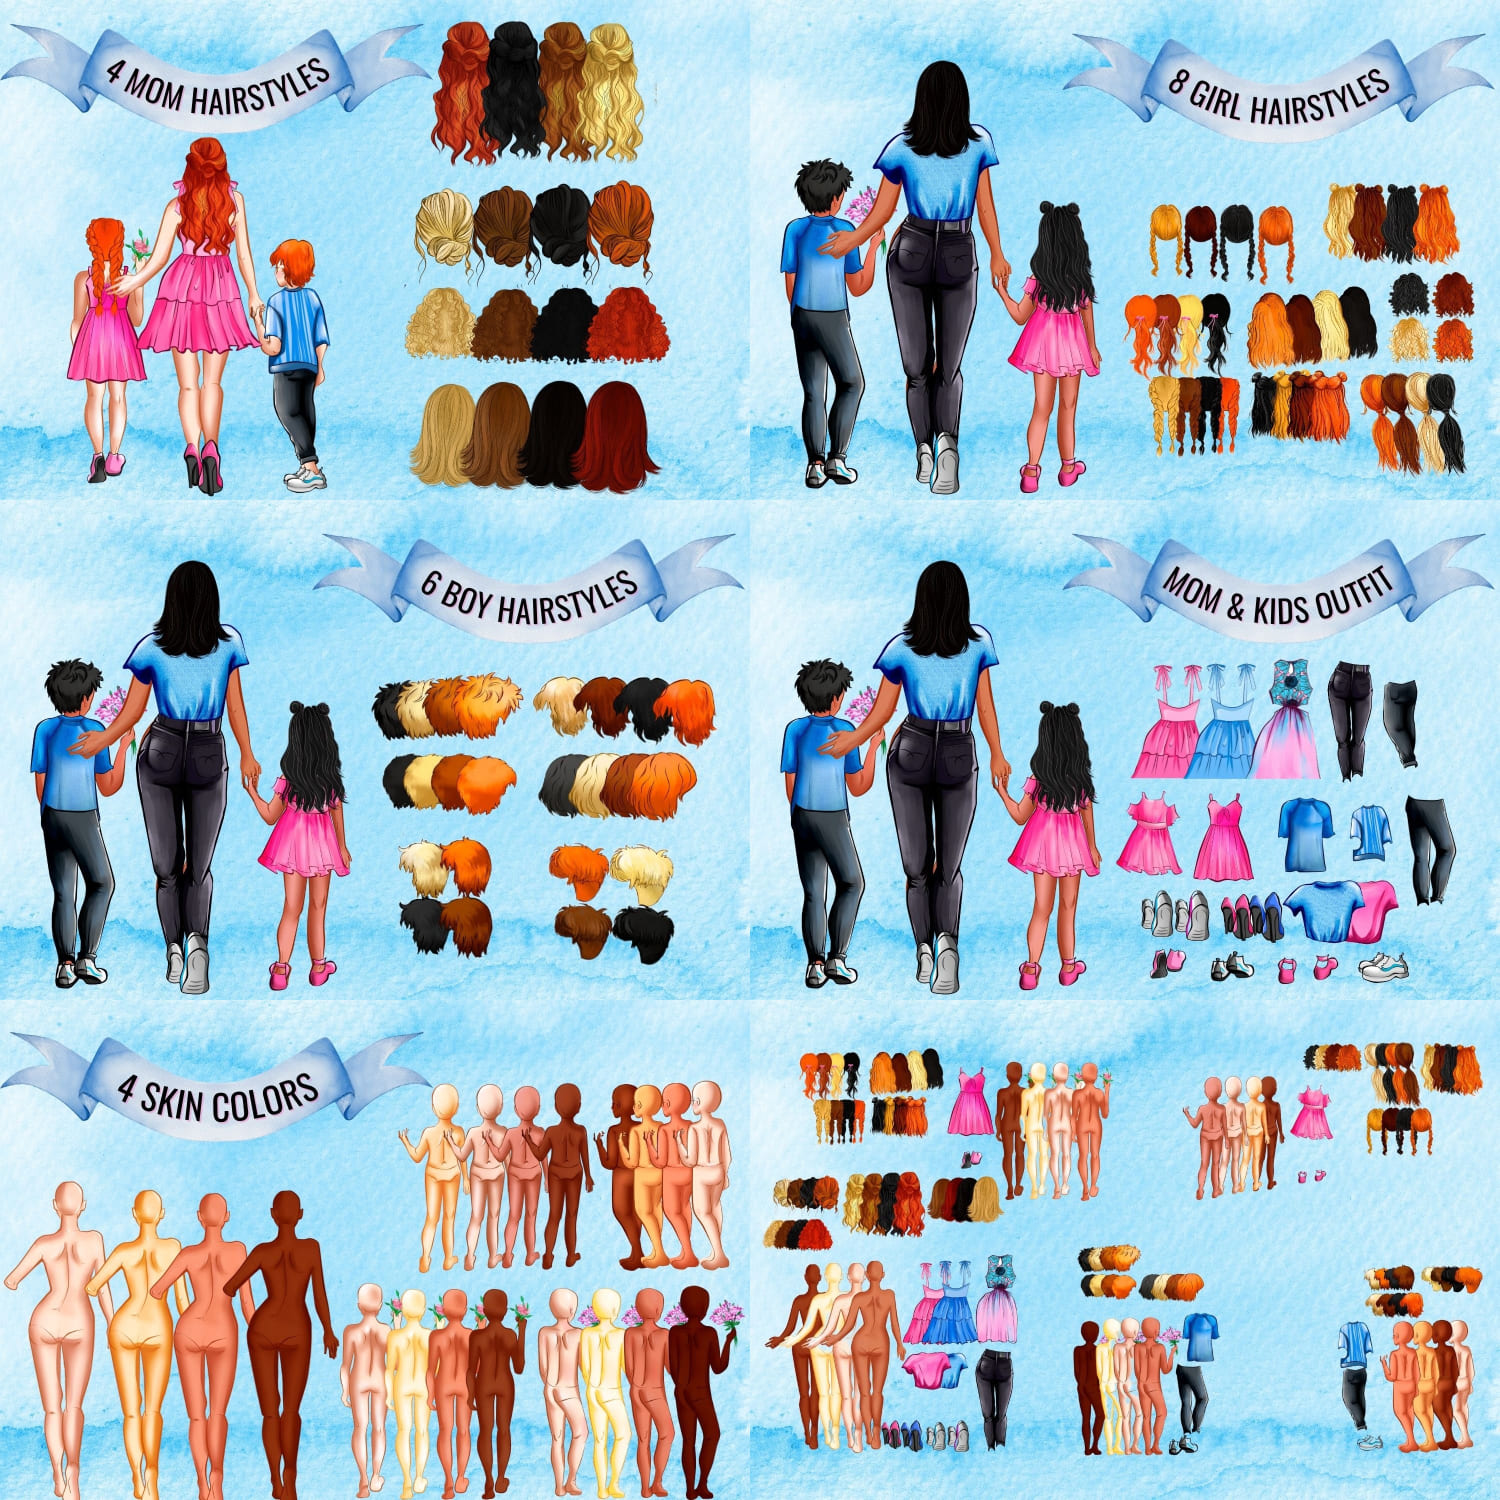 Slides depicting variations of hairstyles, clothes and skin for mothers and children.